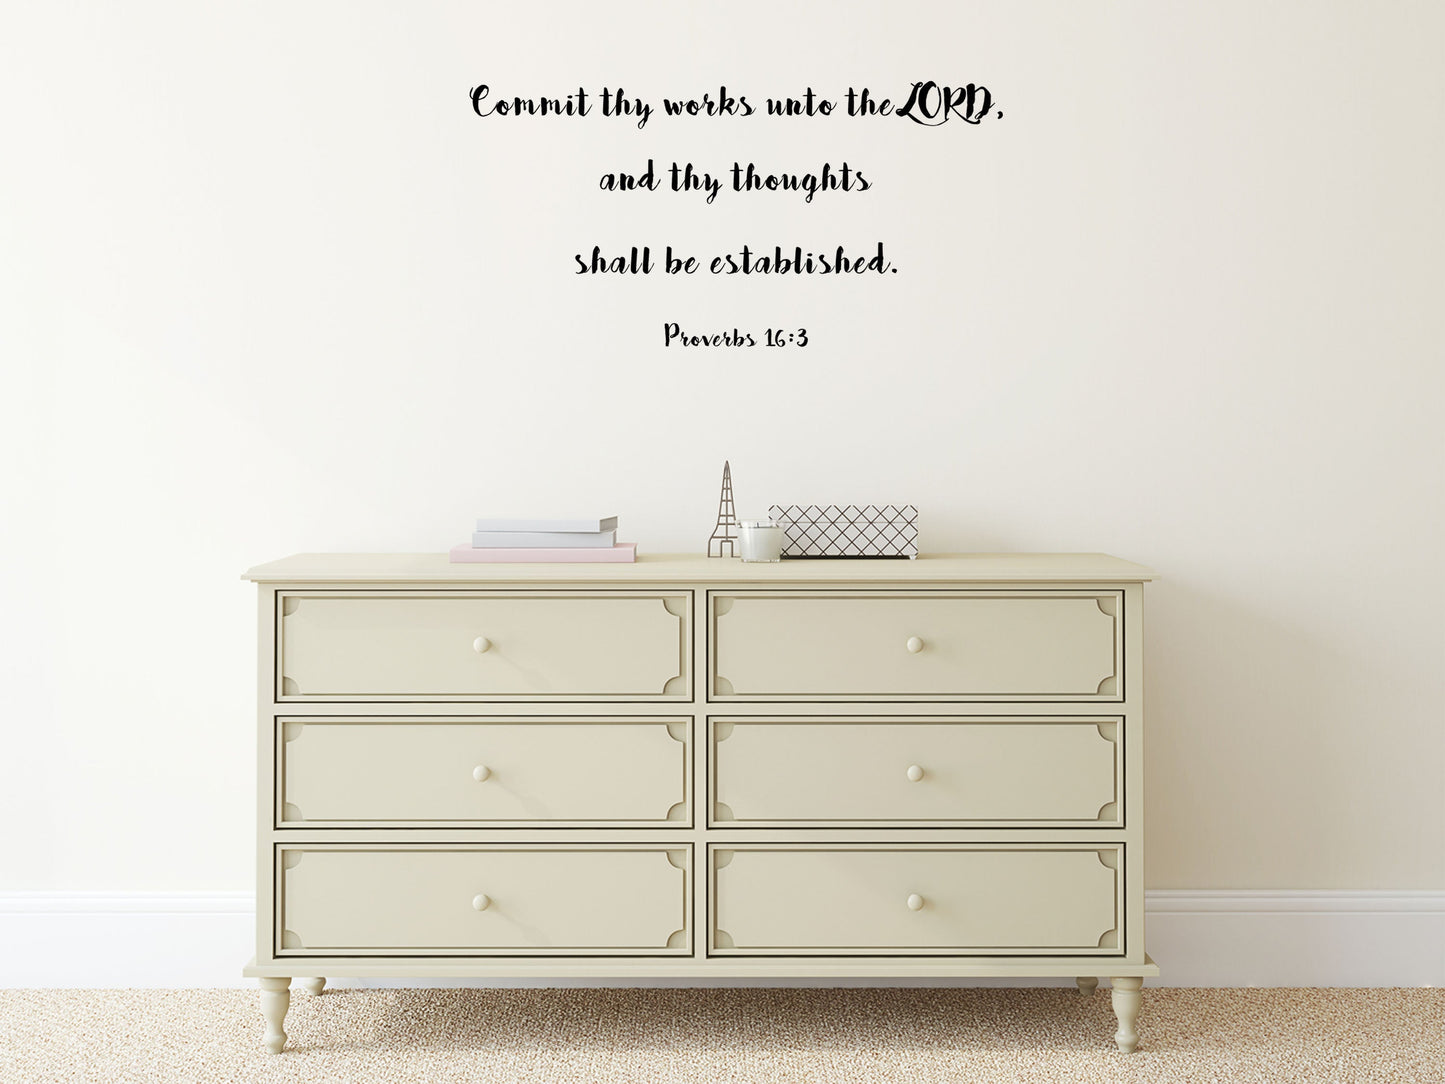 Proverbs 16:3 Christian KJV Wall Decal Sticker - Commit Thy Works Unto The Lord Scripture - Proverbs Wall Decal - Religious Wall Decal Vinyl Wall Decal Title Done 